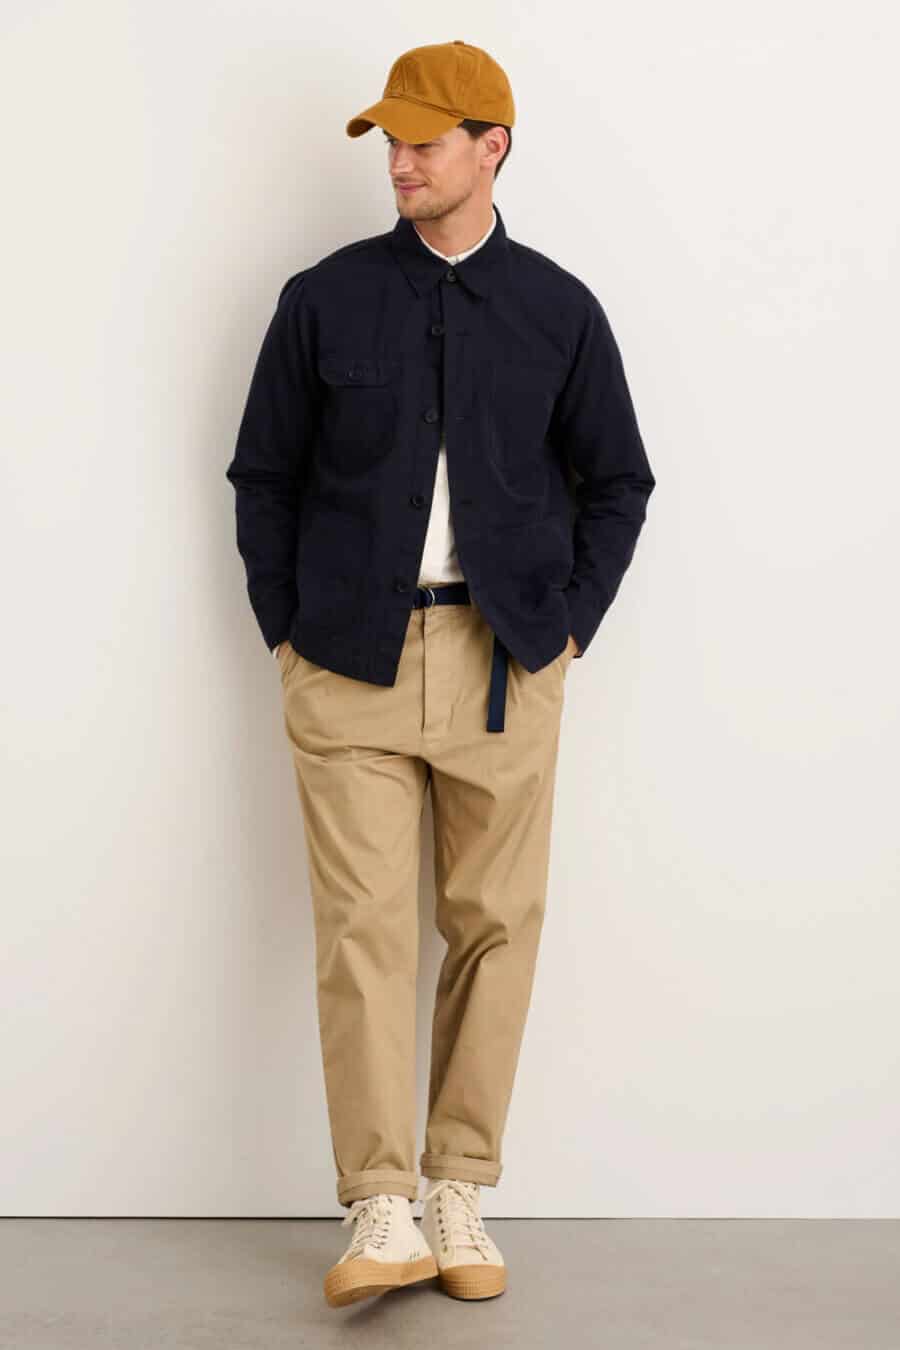 Men's linen worker jacket with relaxed chinos and sneakers outfit